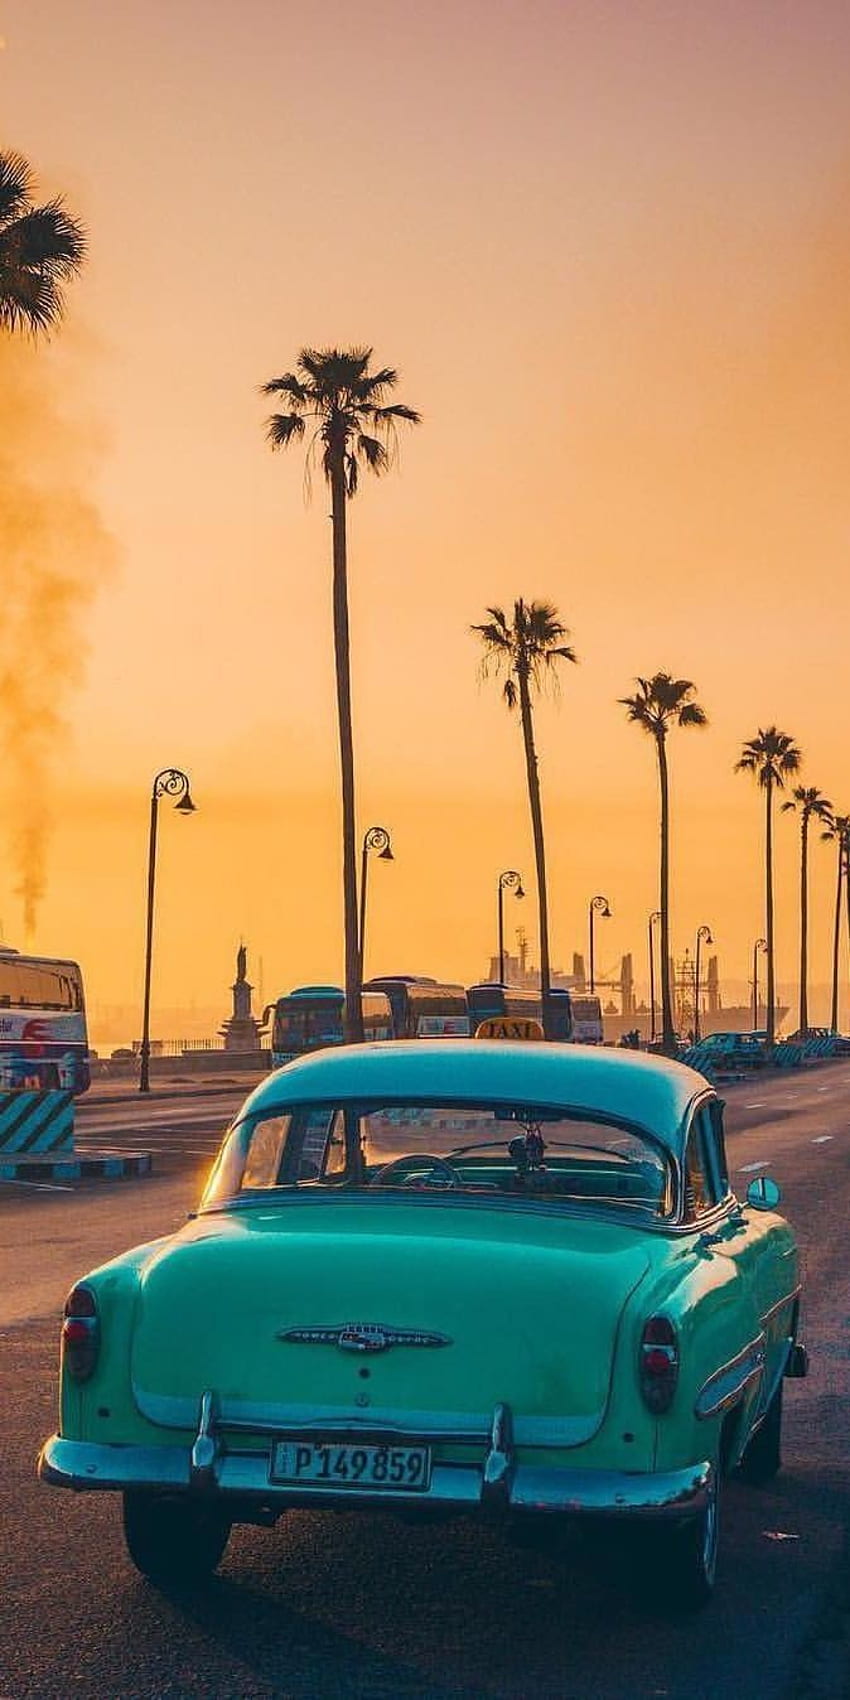 Vintage car parked on the street, surrounded by palm trees, sunset in the background, cuba travel, aesthetic backgrounds - California, sunset, cars, palm tree, beautiful, yellow iphone, 50s